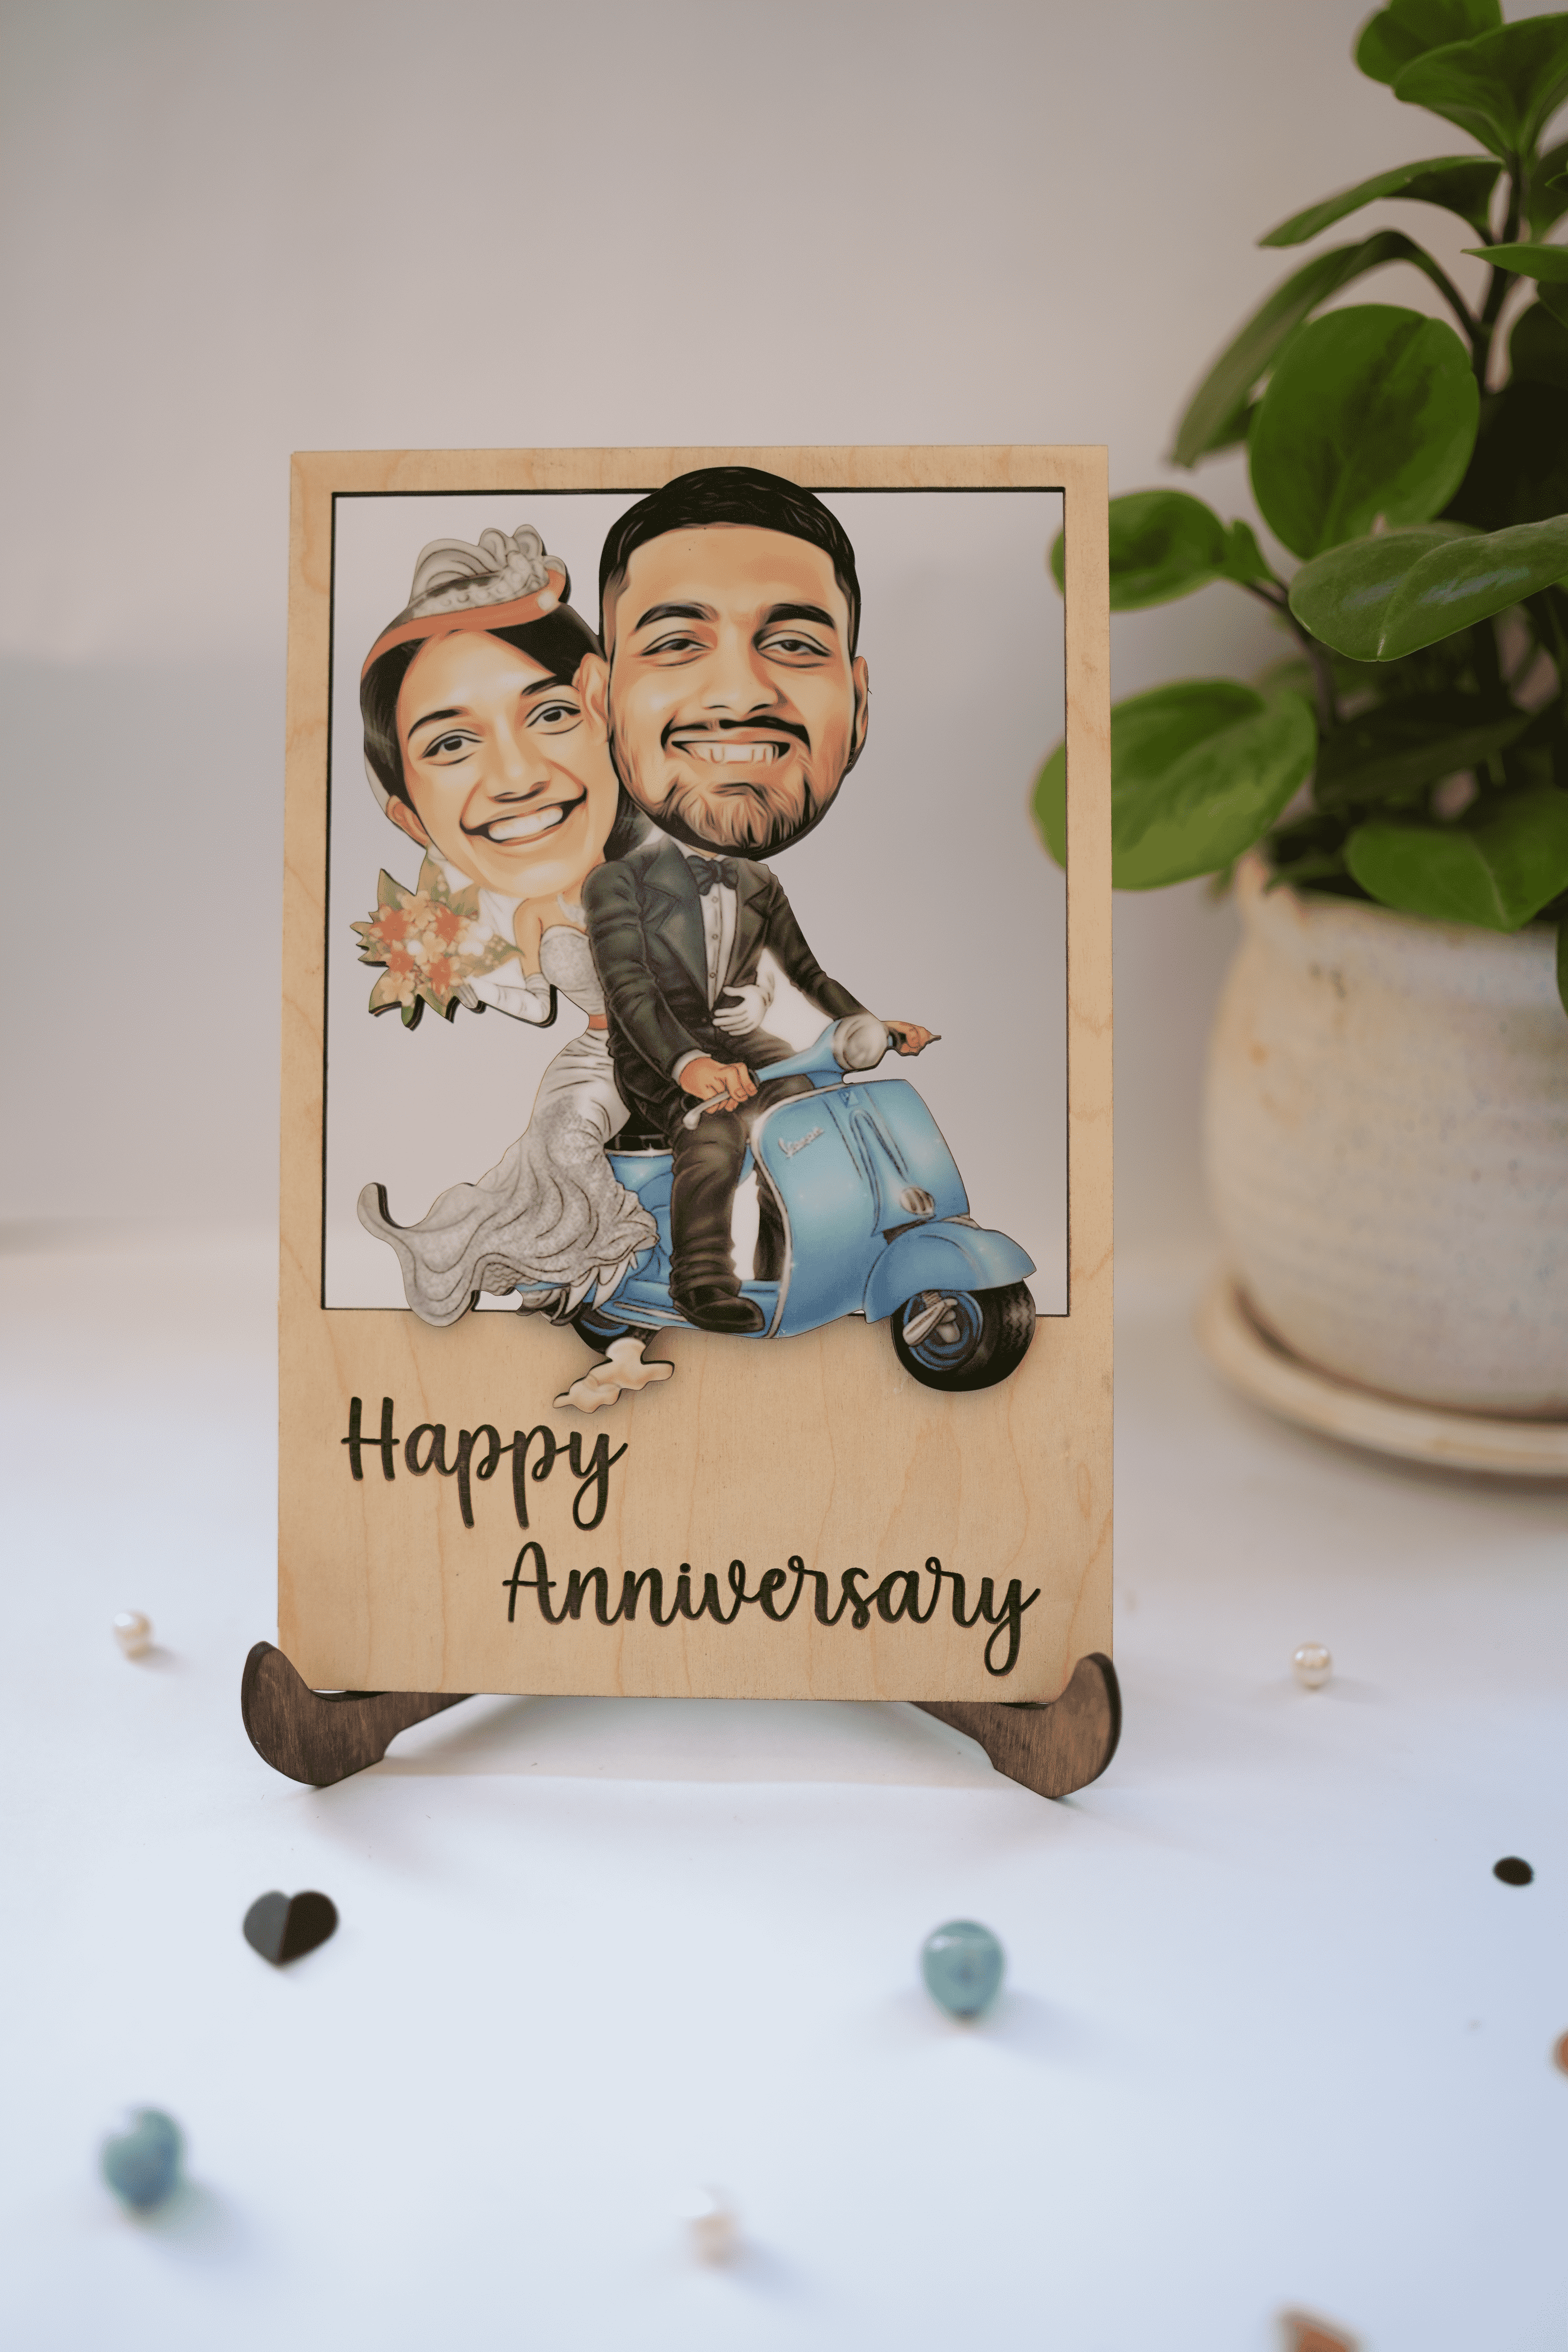 Buy Customized 3D Colorful Caricature With Cute Couple Photo from  Giftcart.com